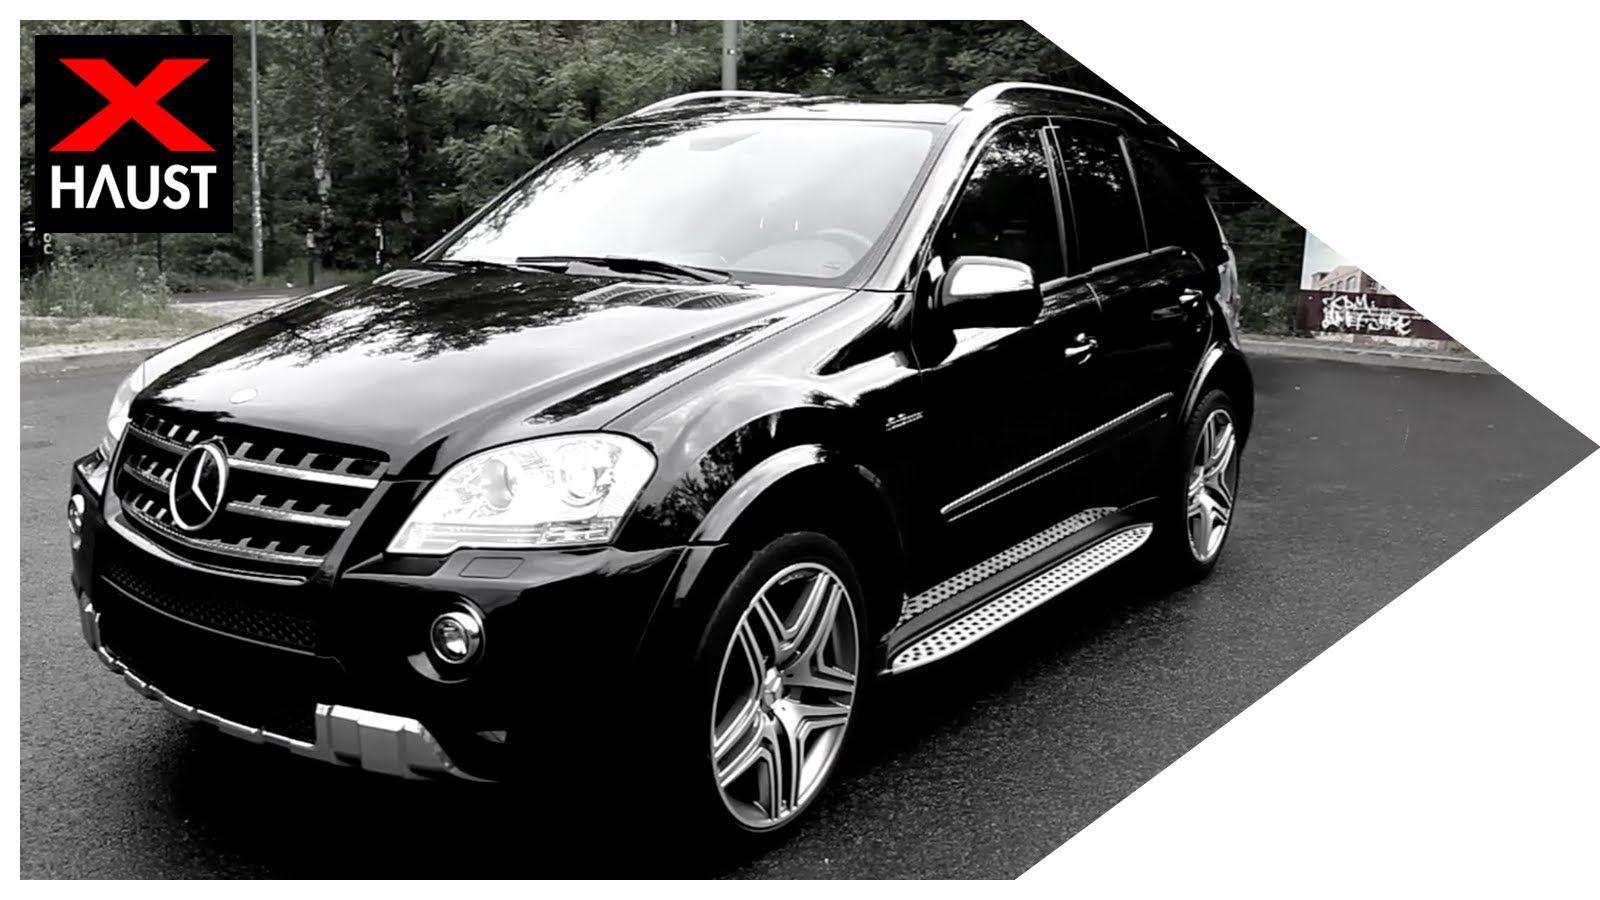 Saturday 07th March 2015 Mercedes Ml 320 HD Background for PC